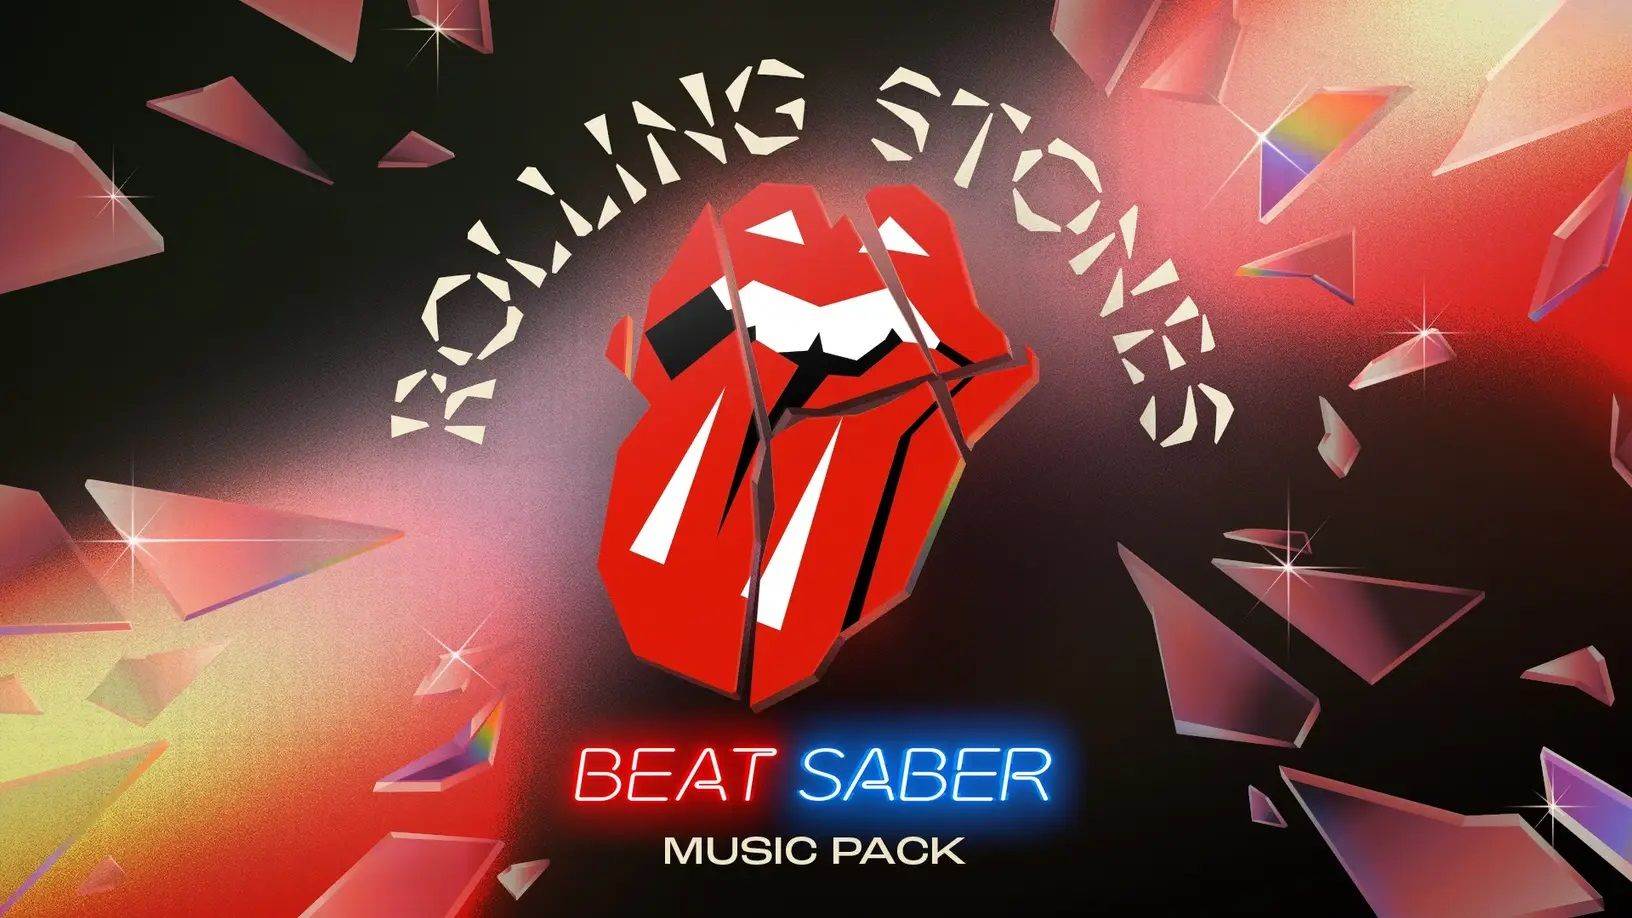  The Rolling Stones Music Pack (3).jpg 